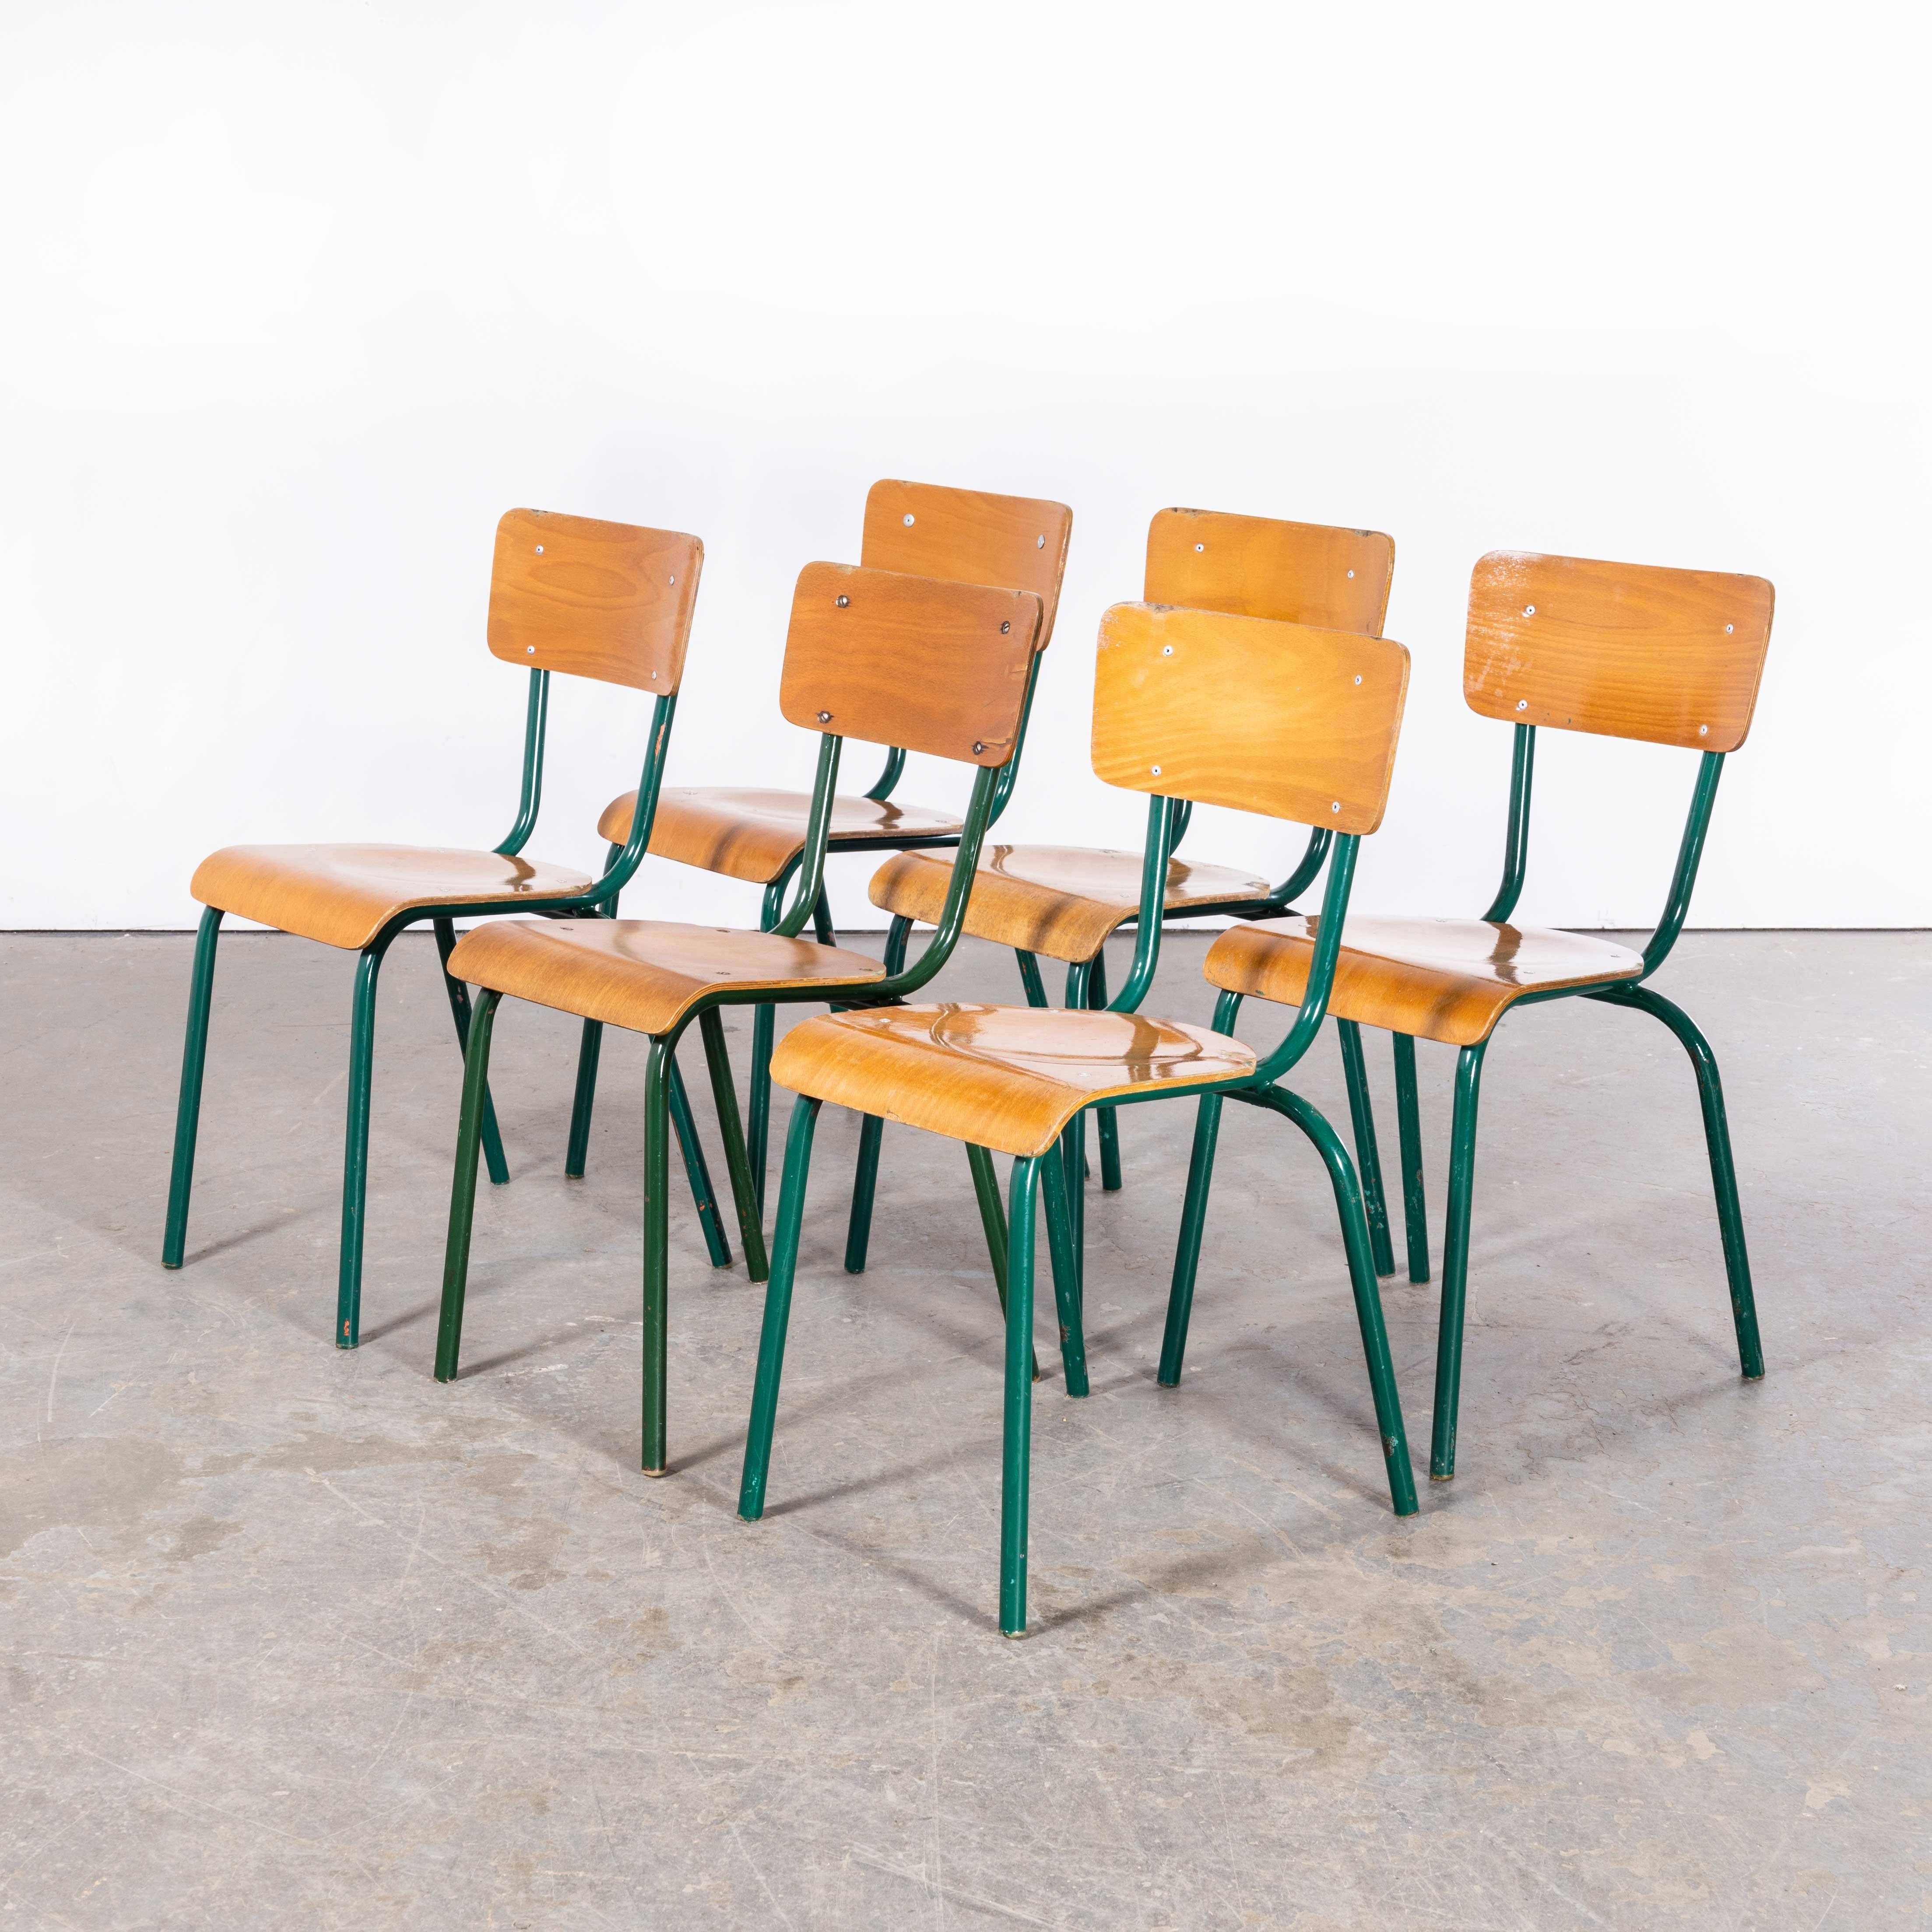 1960’s French Mullca Dark Green Simple Stacking Dining Chairs – Set Of Four
1960’s French Mullca Dark Green Simple Stacking Dining Chairs – Set Of Four. One of our most favourite makers, in 1947 Robert Muller and Gaston Cavaillon created the company